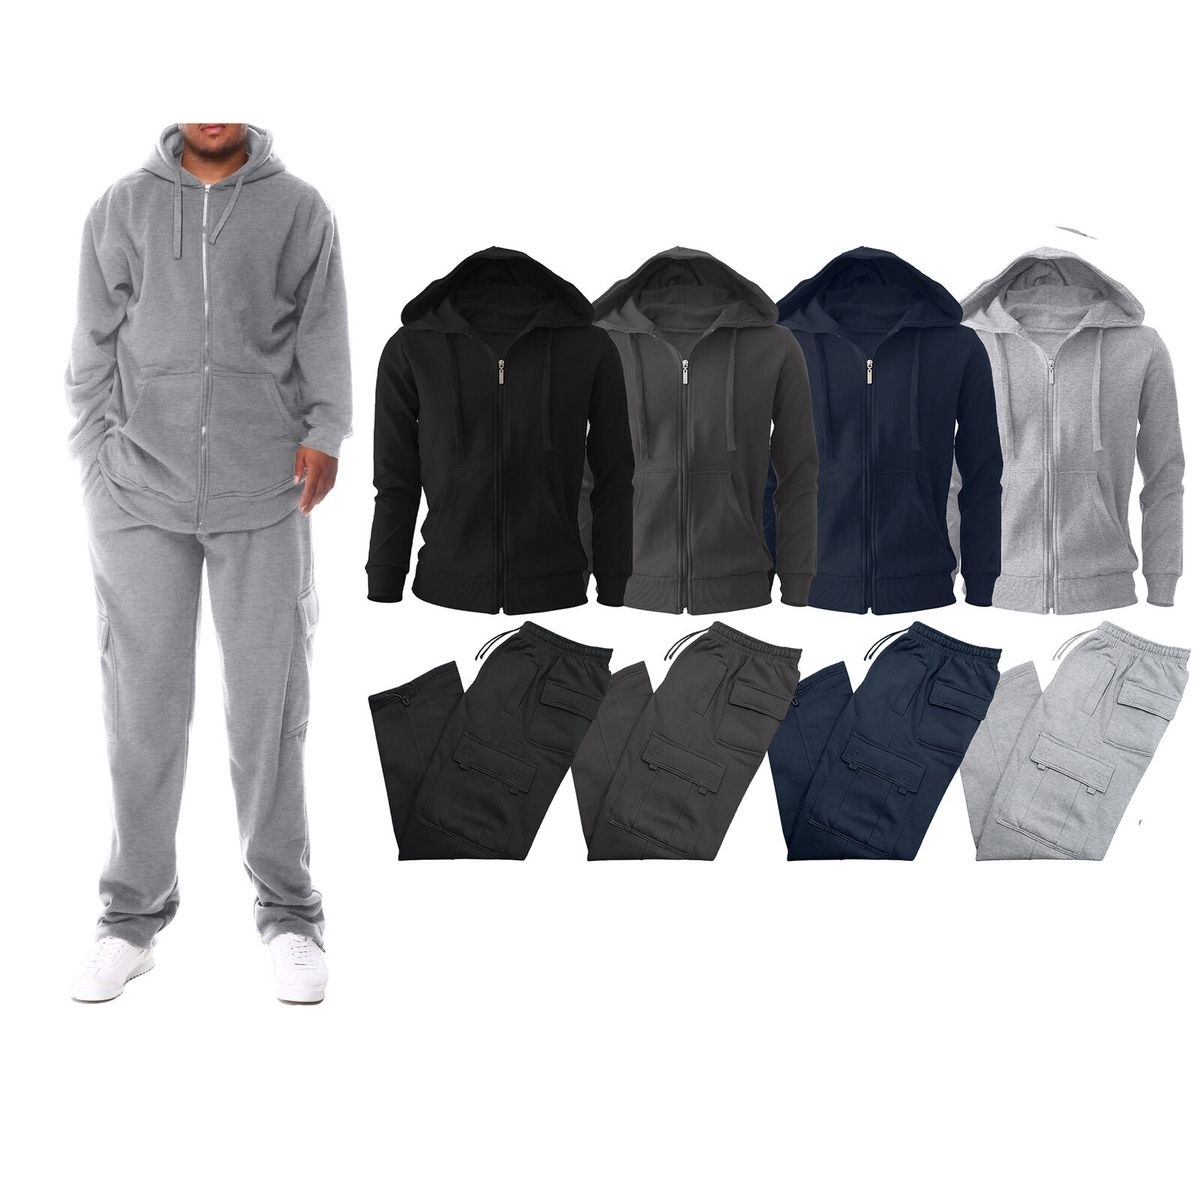 Multi-Pack: Men's Big & Tall Winter Warm Athletic Active Cozy Fleece Lined Multi-Pocket Full Zip Up Cargo Tracksuit - Navy, 1-pack, Xx-large